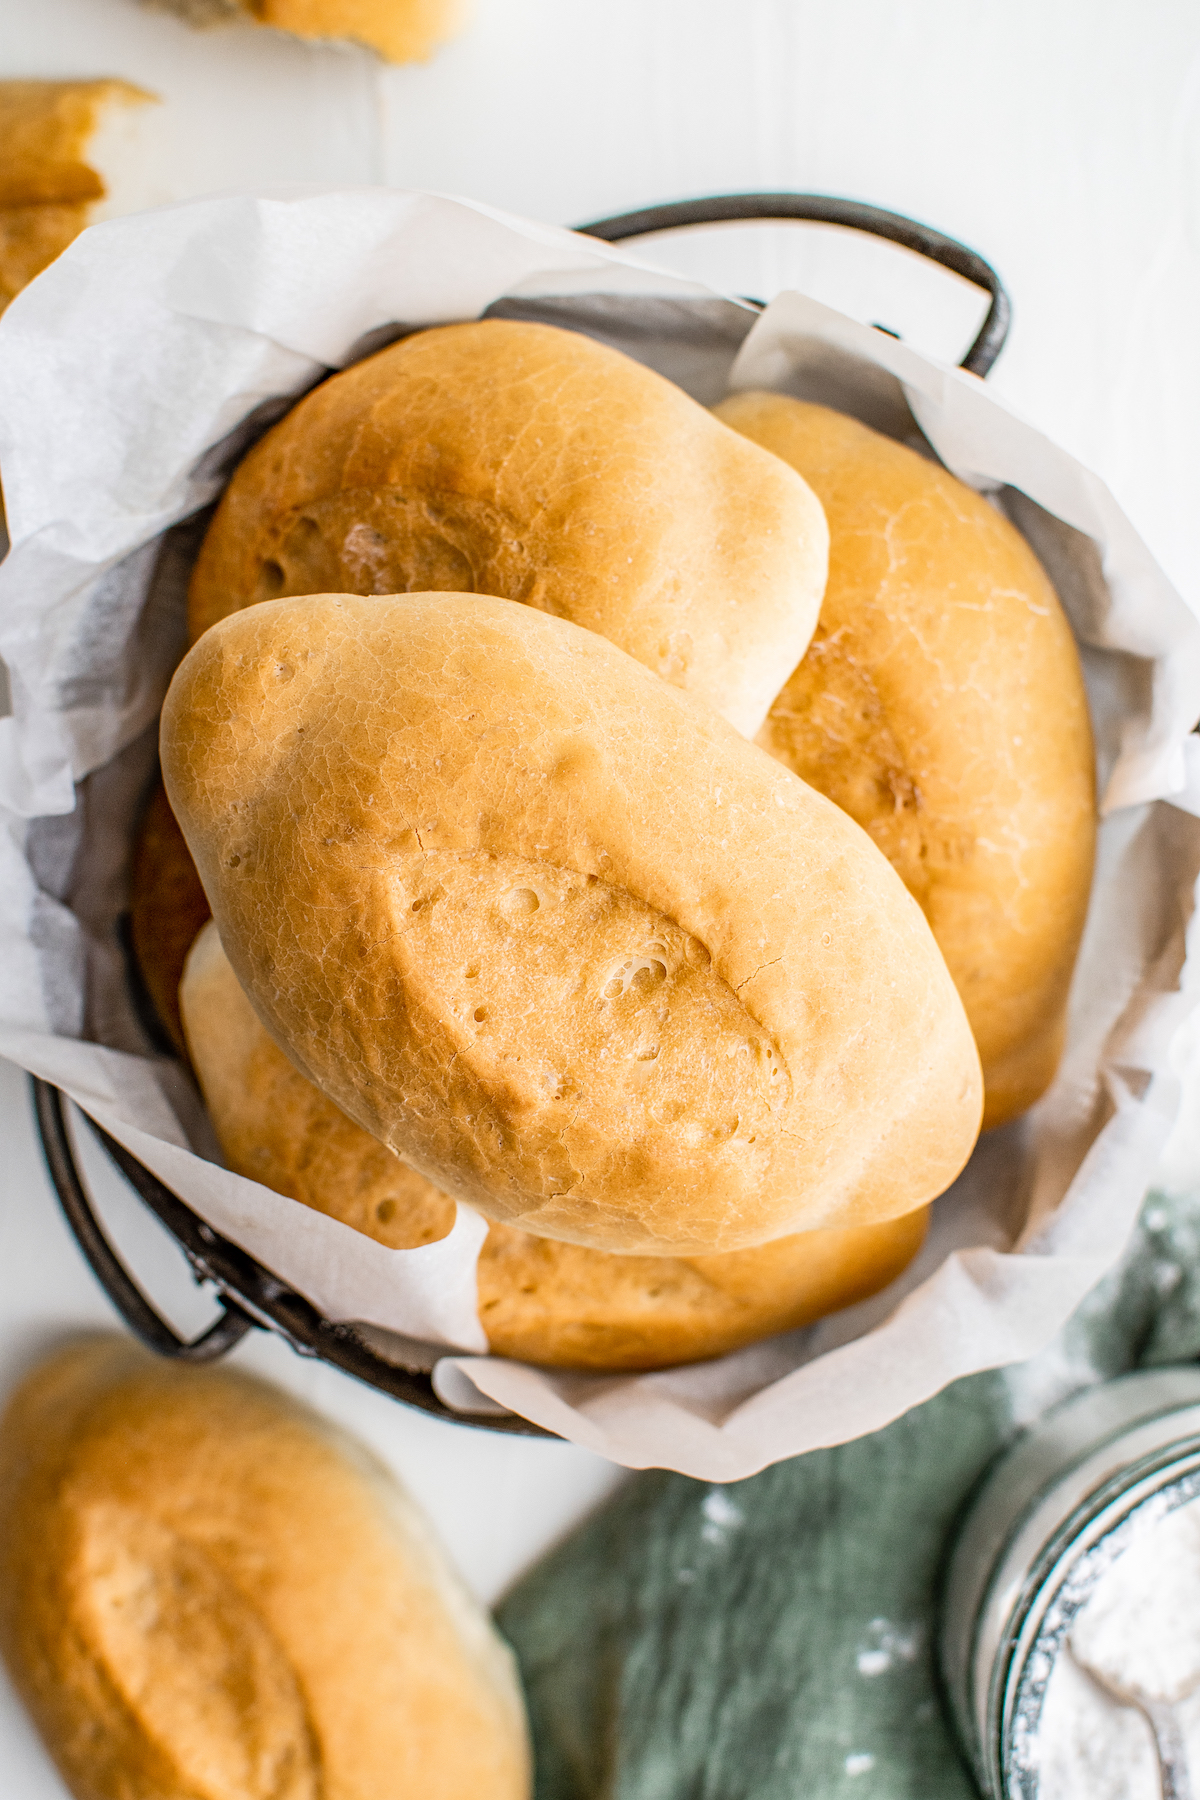 A bowl of oval-shaped rolls.